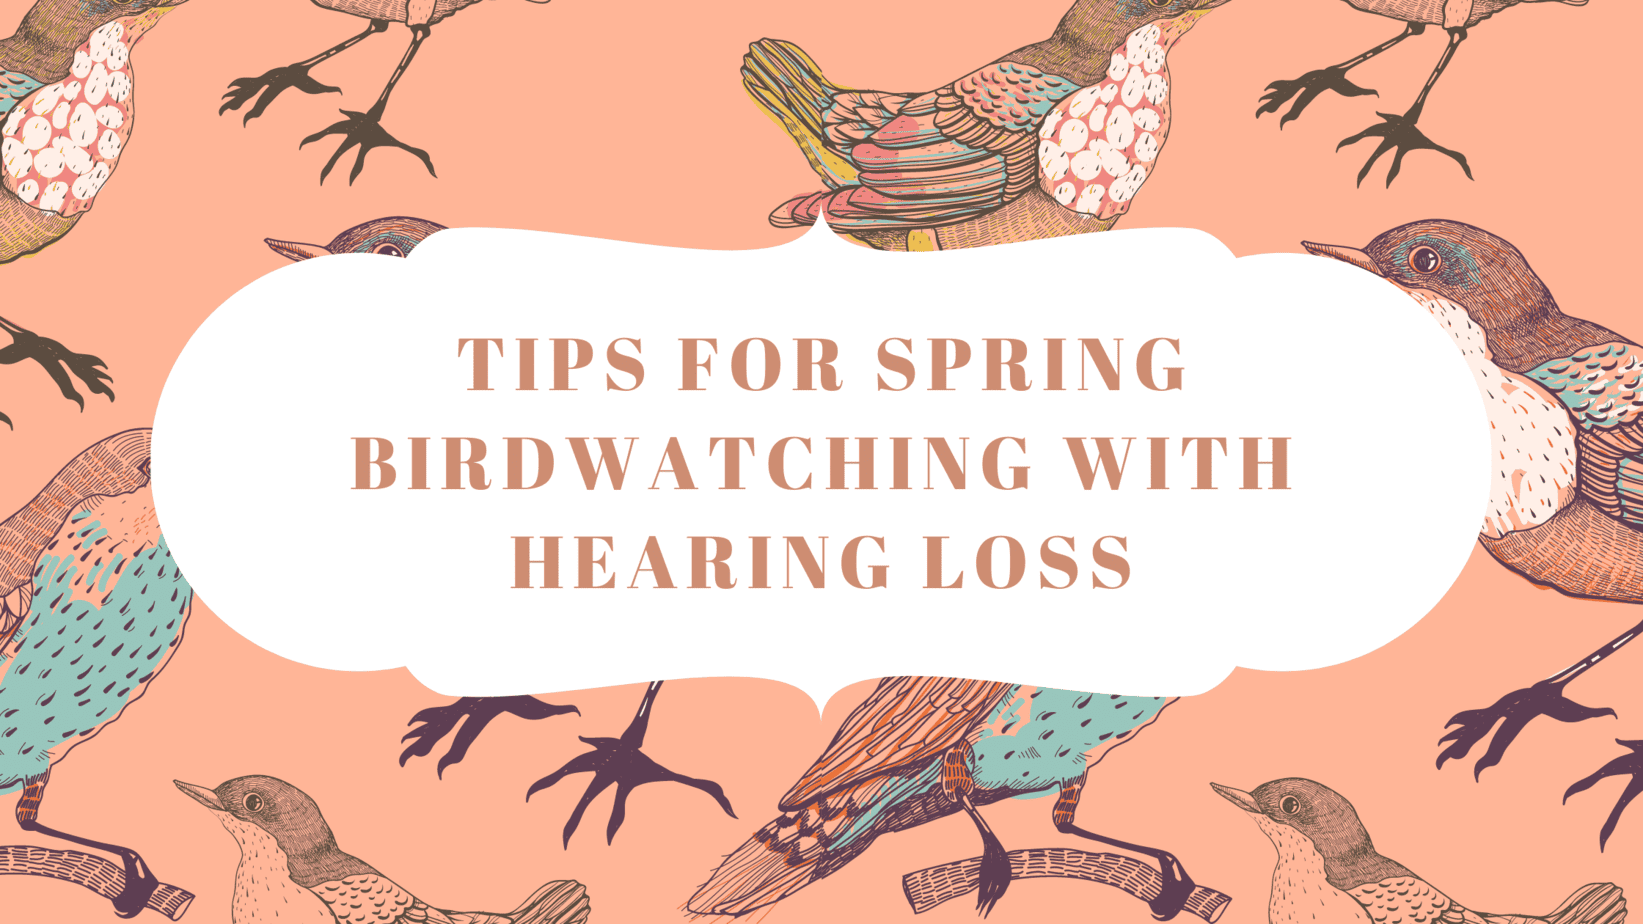 Tips for Spring Birdwatching with Hearing Loss